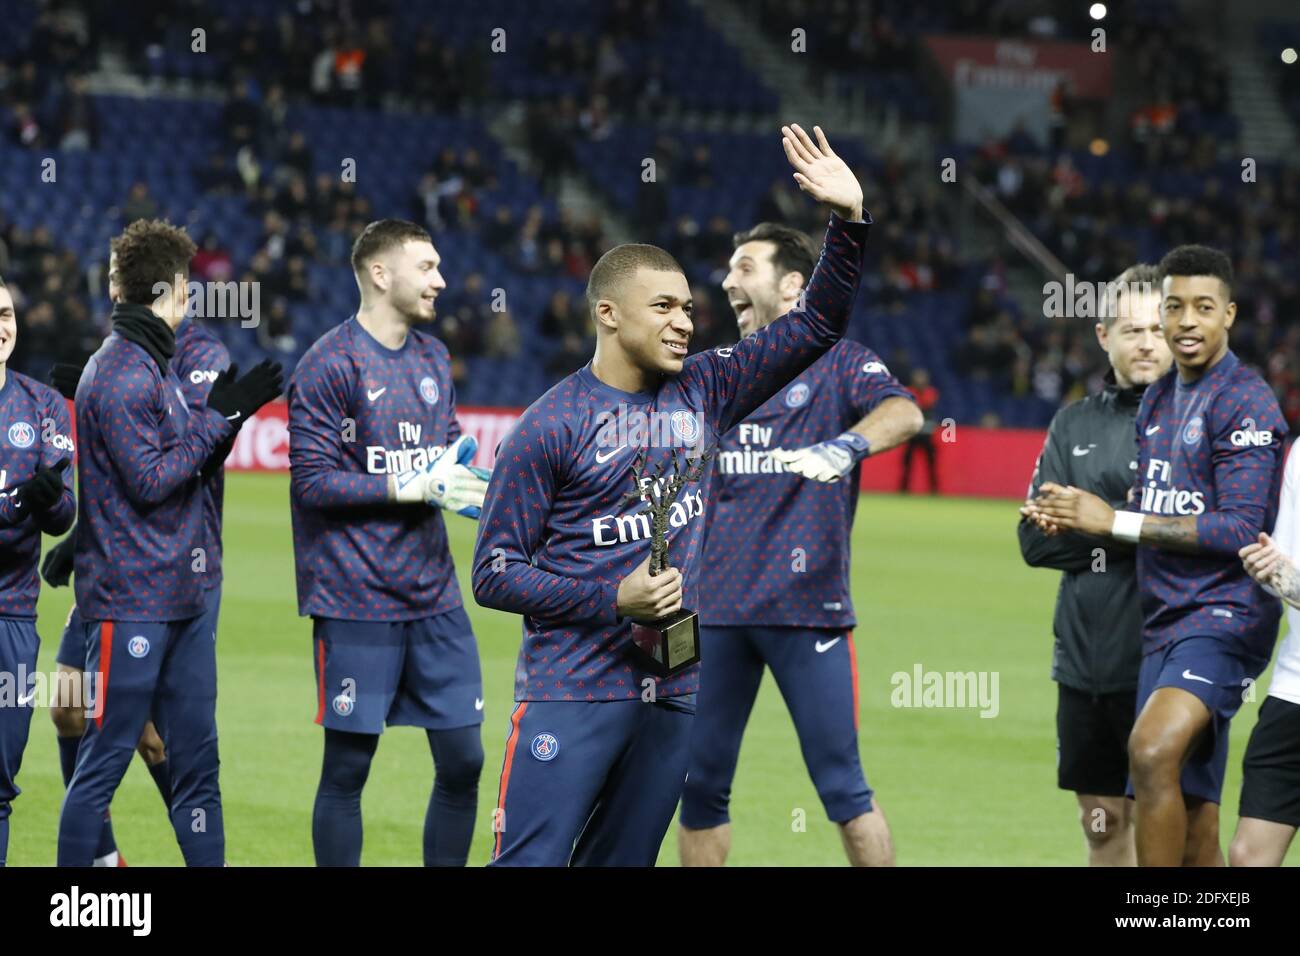 PSG's Kylian Mbappe presenting his 'Kopa Trophy' for 2018 before the French First League soccer match, PSG vs Nantes in Parc des Princes, France, on December 22nd, 2018. PSG won 1-0. Photo by Henri Szwarc/ABACAPRESS.COM Stock Photo